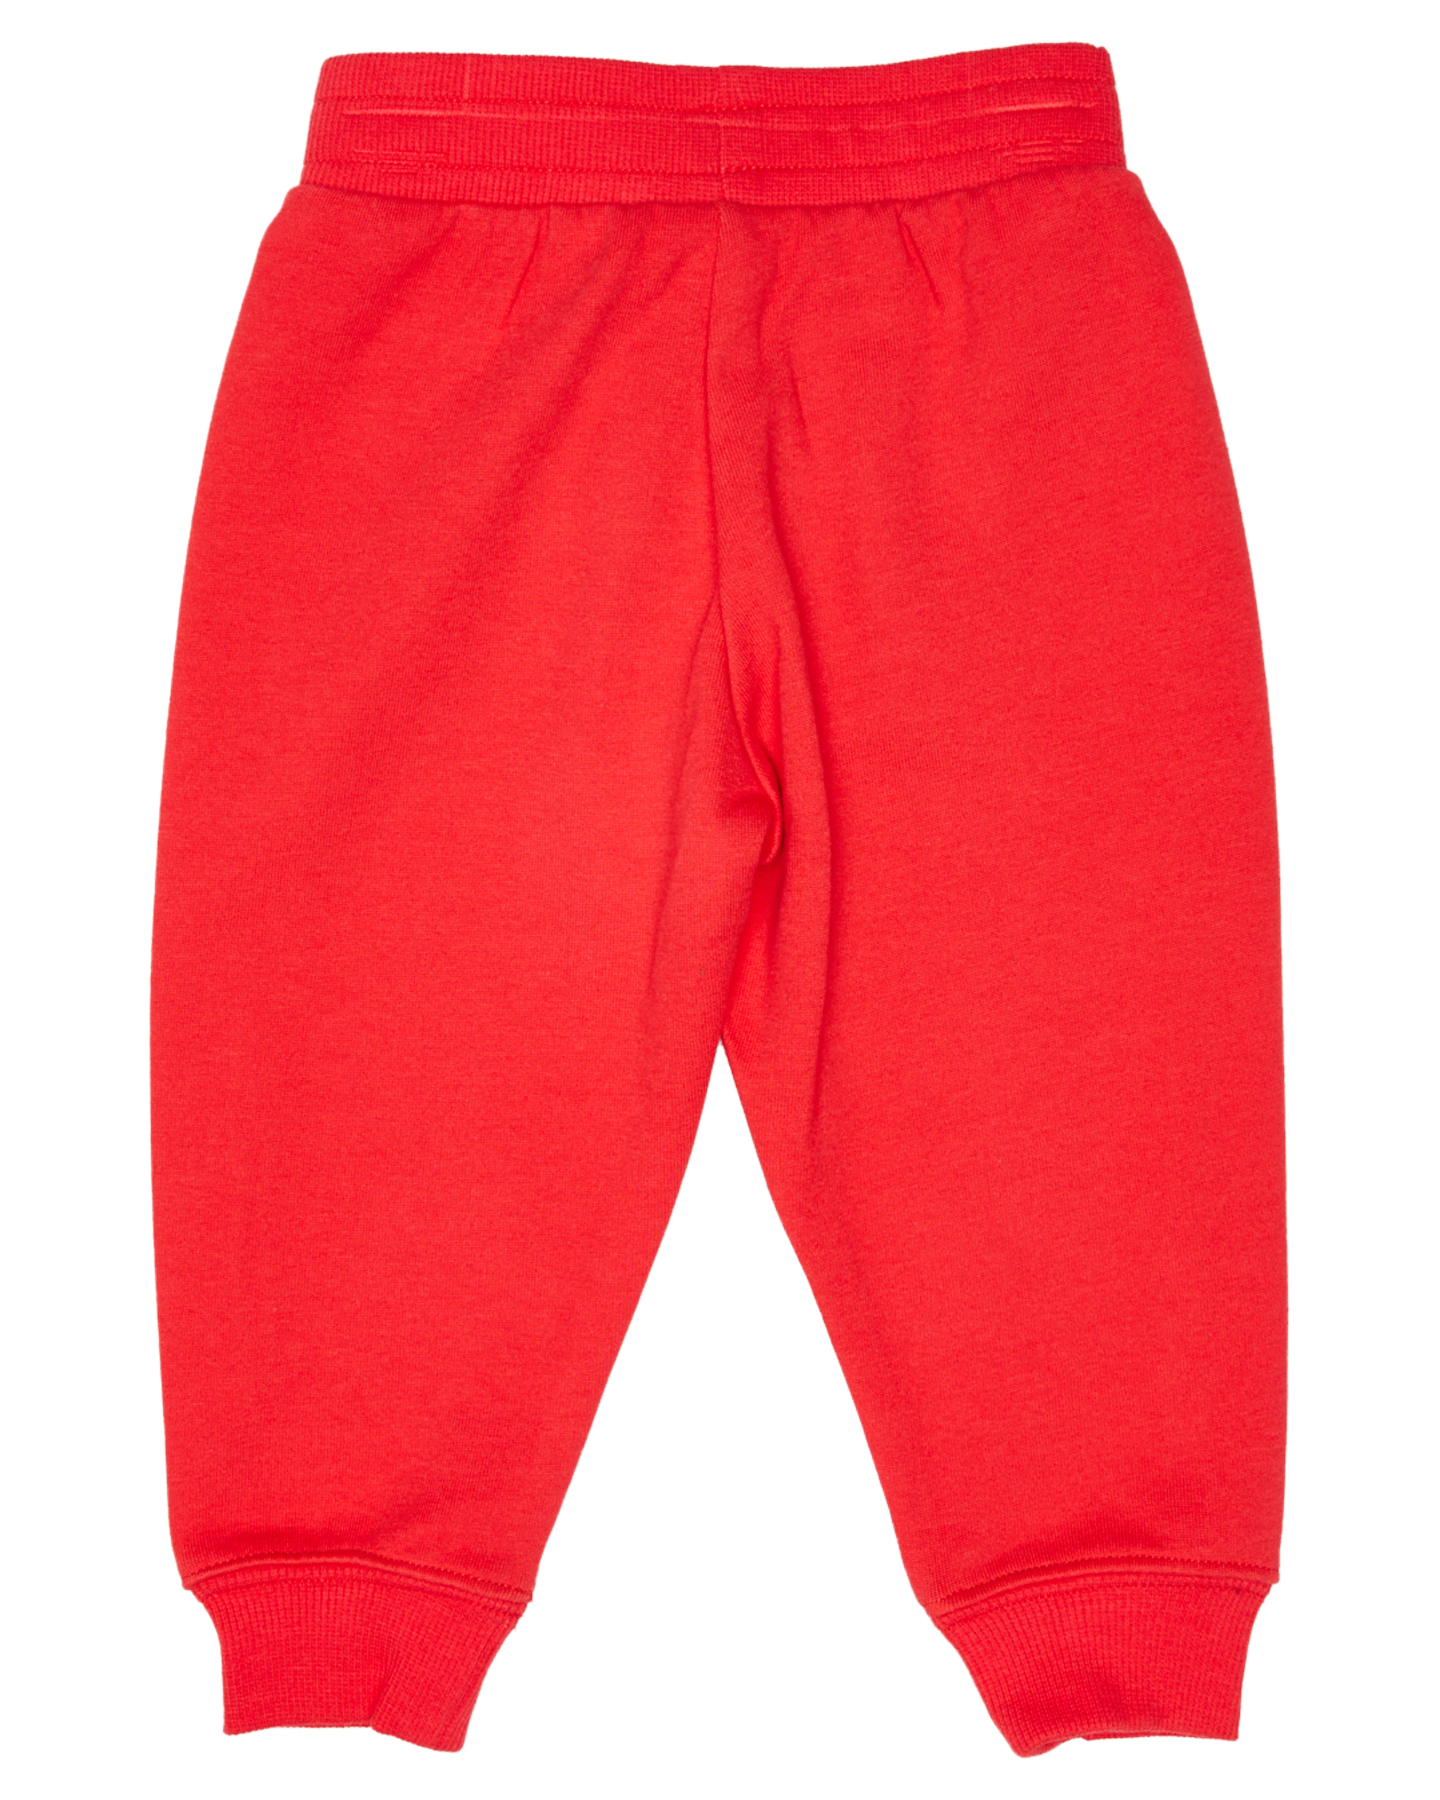 Bonds Cool Sweats Trackie - Babies - Strong Blush | SurfStitch